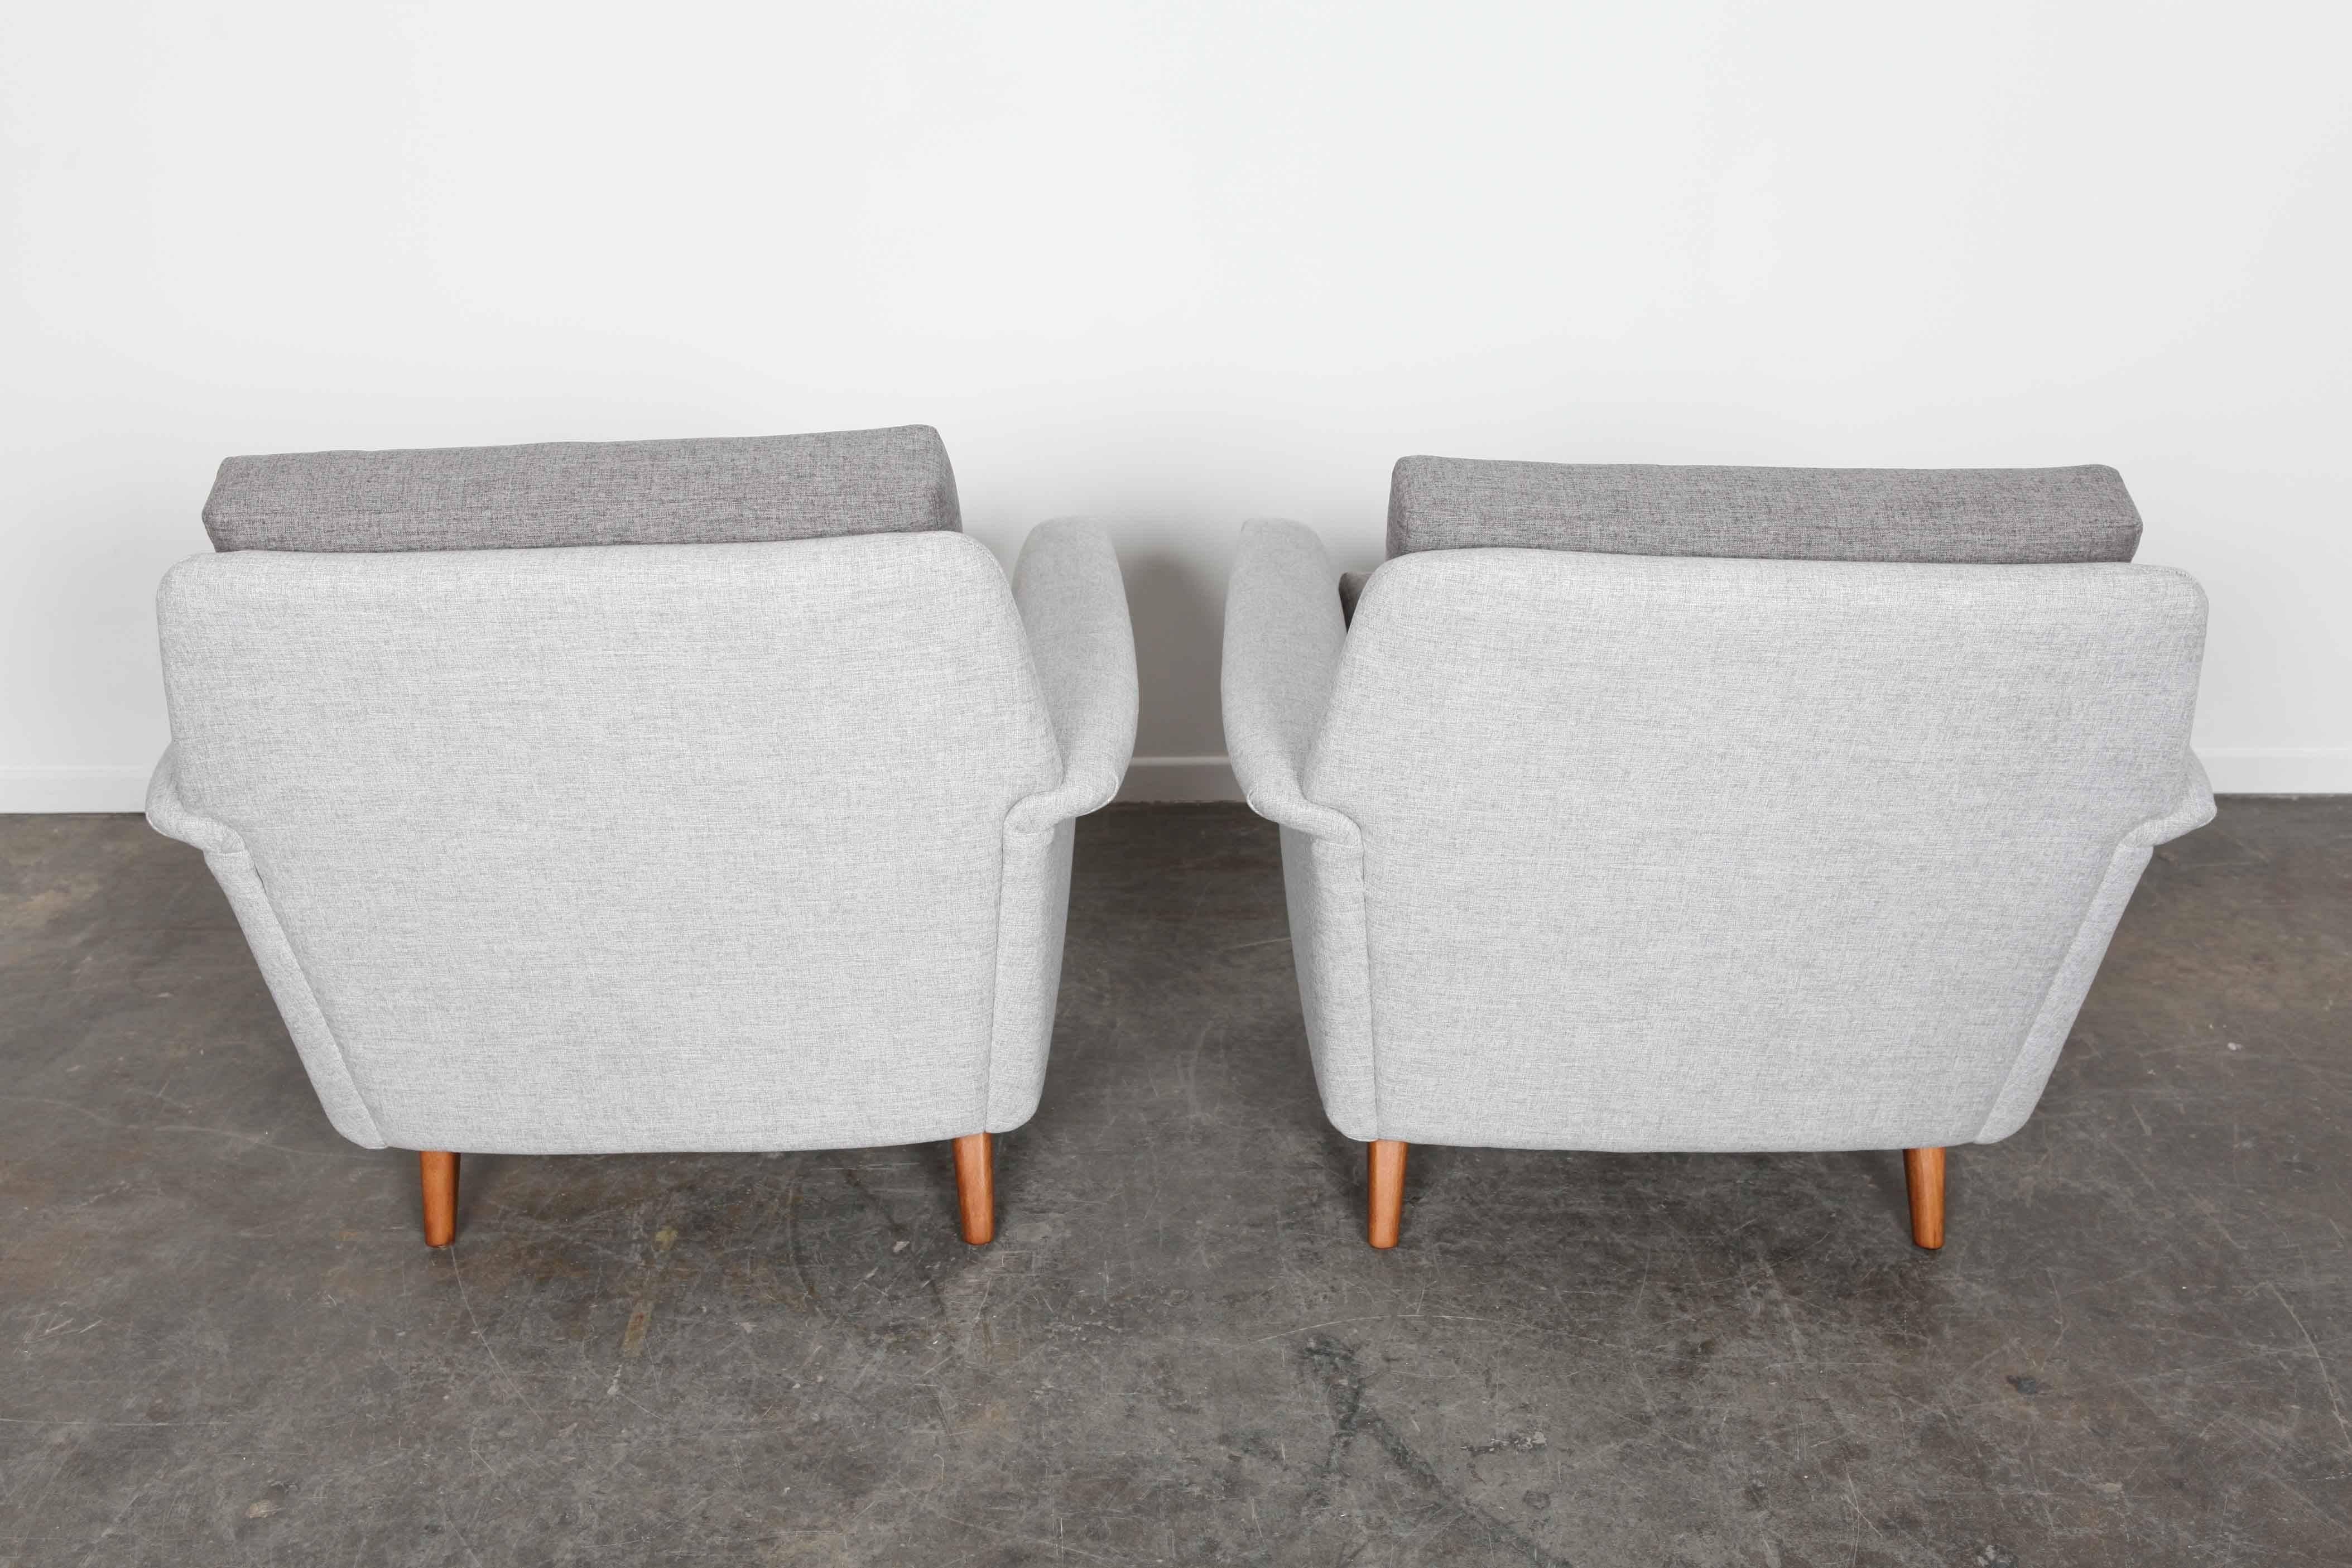 Pair of Swedish Mid-Century Modern Lounge Chairs by Folke Ohlsson for DUX 3